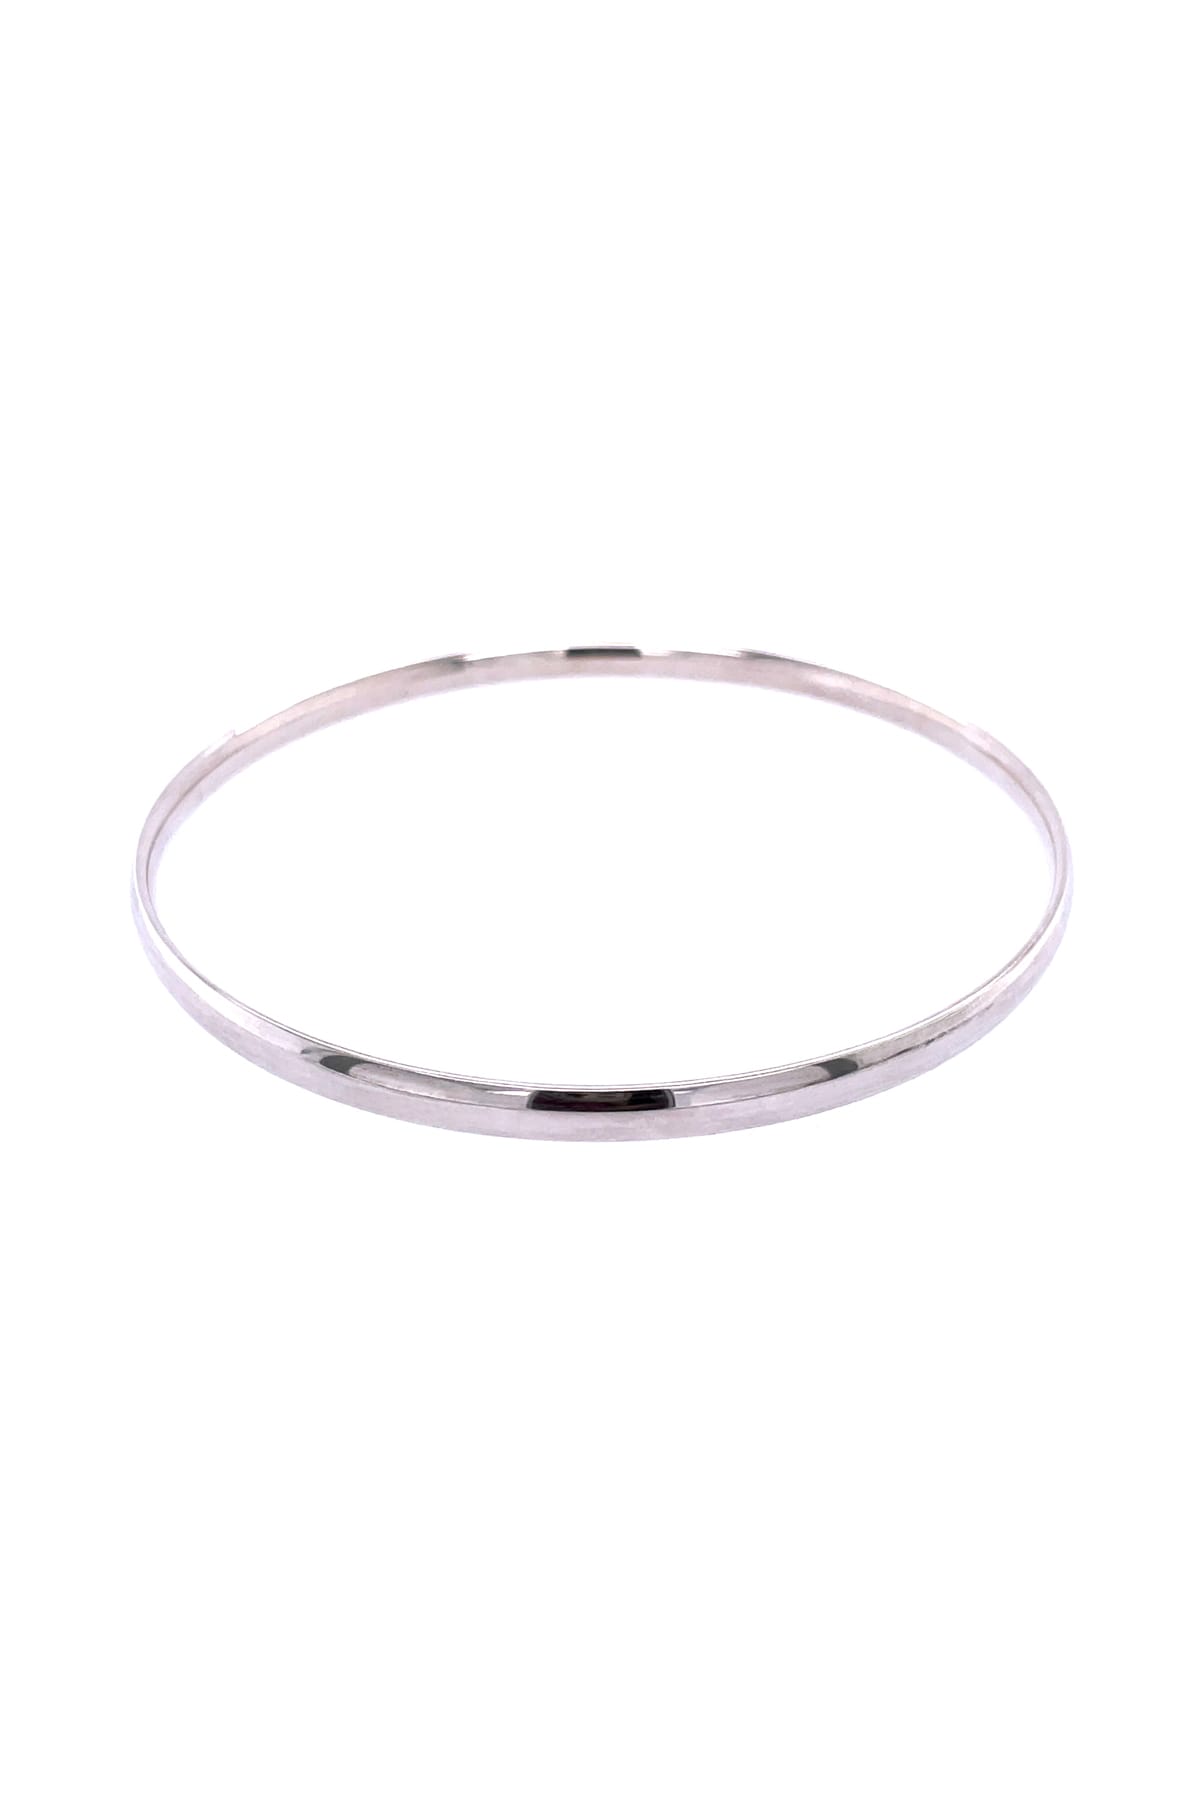 Solid Sterling Silver Round Comfort Fit Bangle at LeGassick Jewellers Gold Coast, Australia